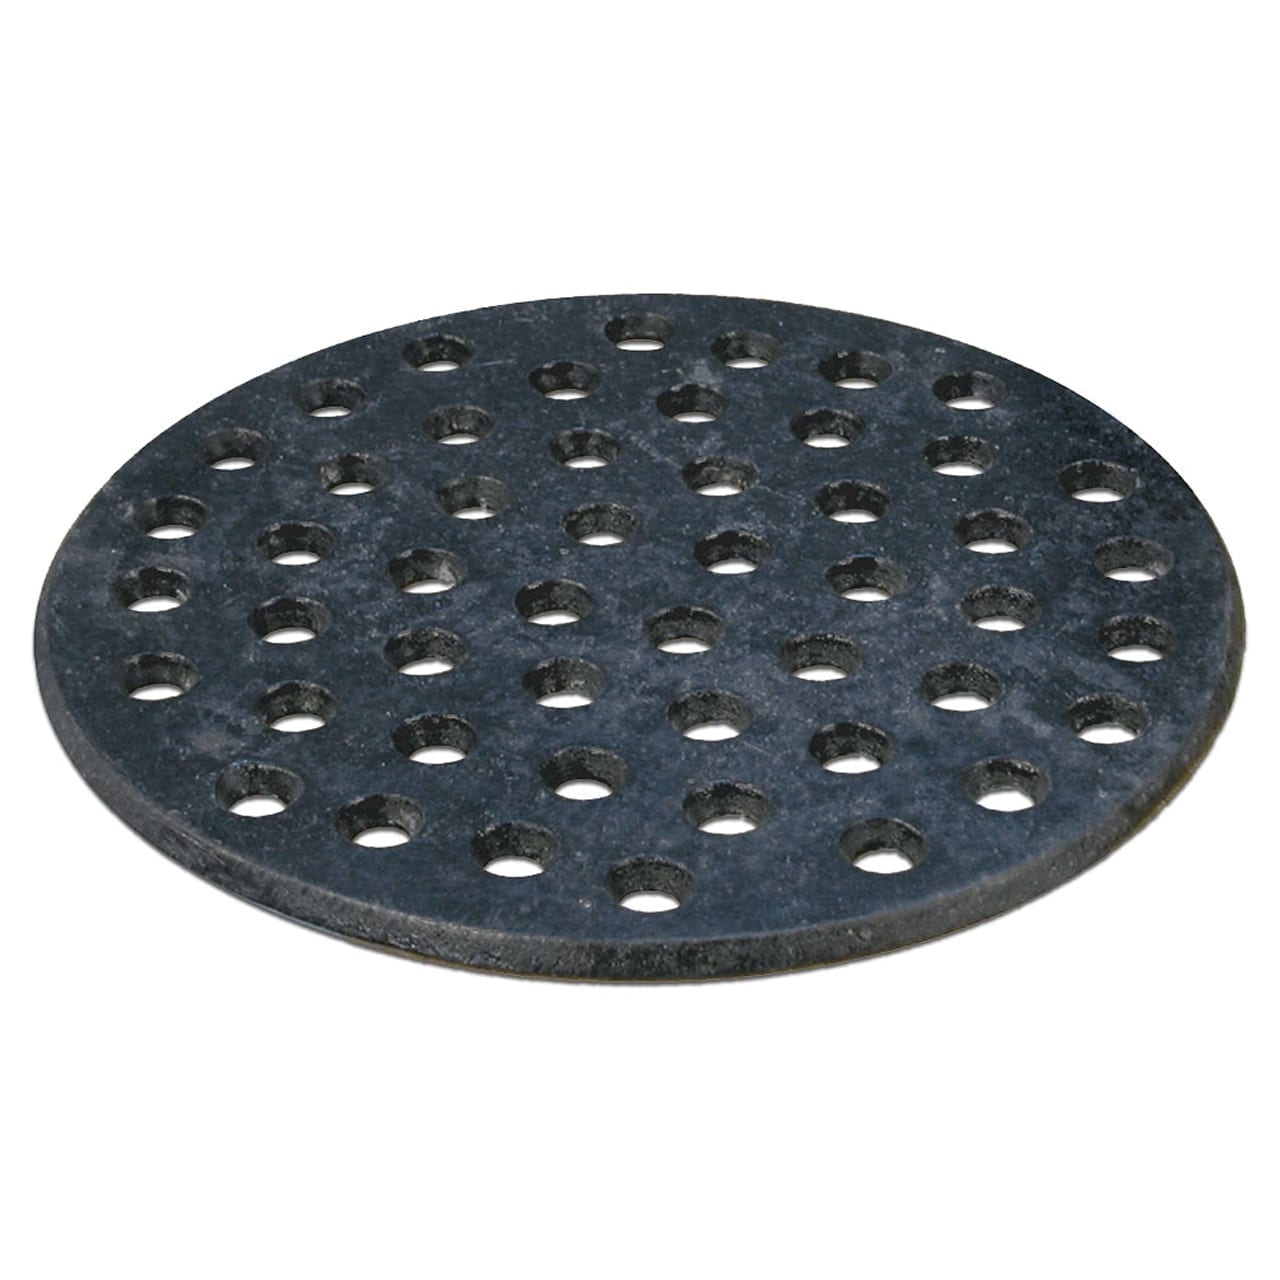 Large Charcoal Grate